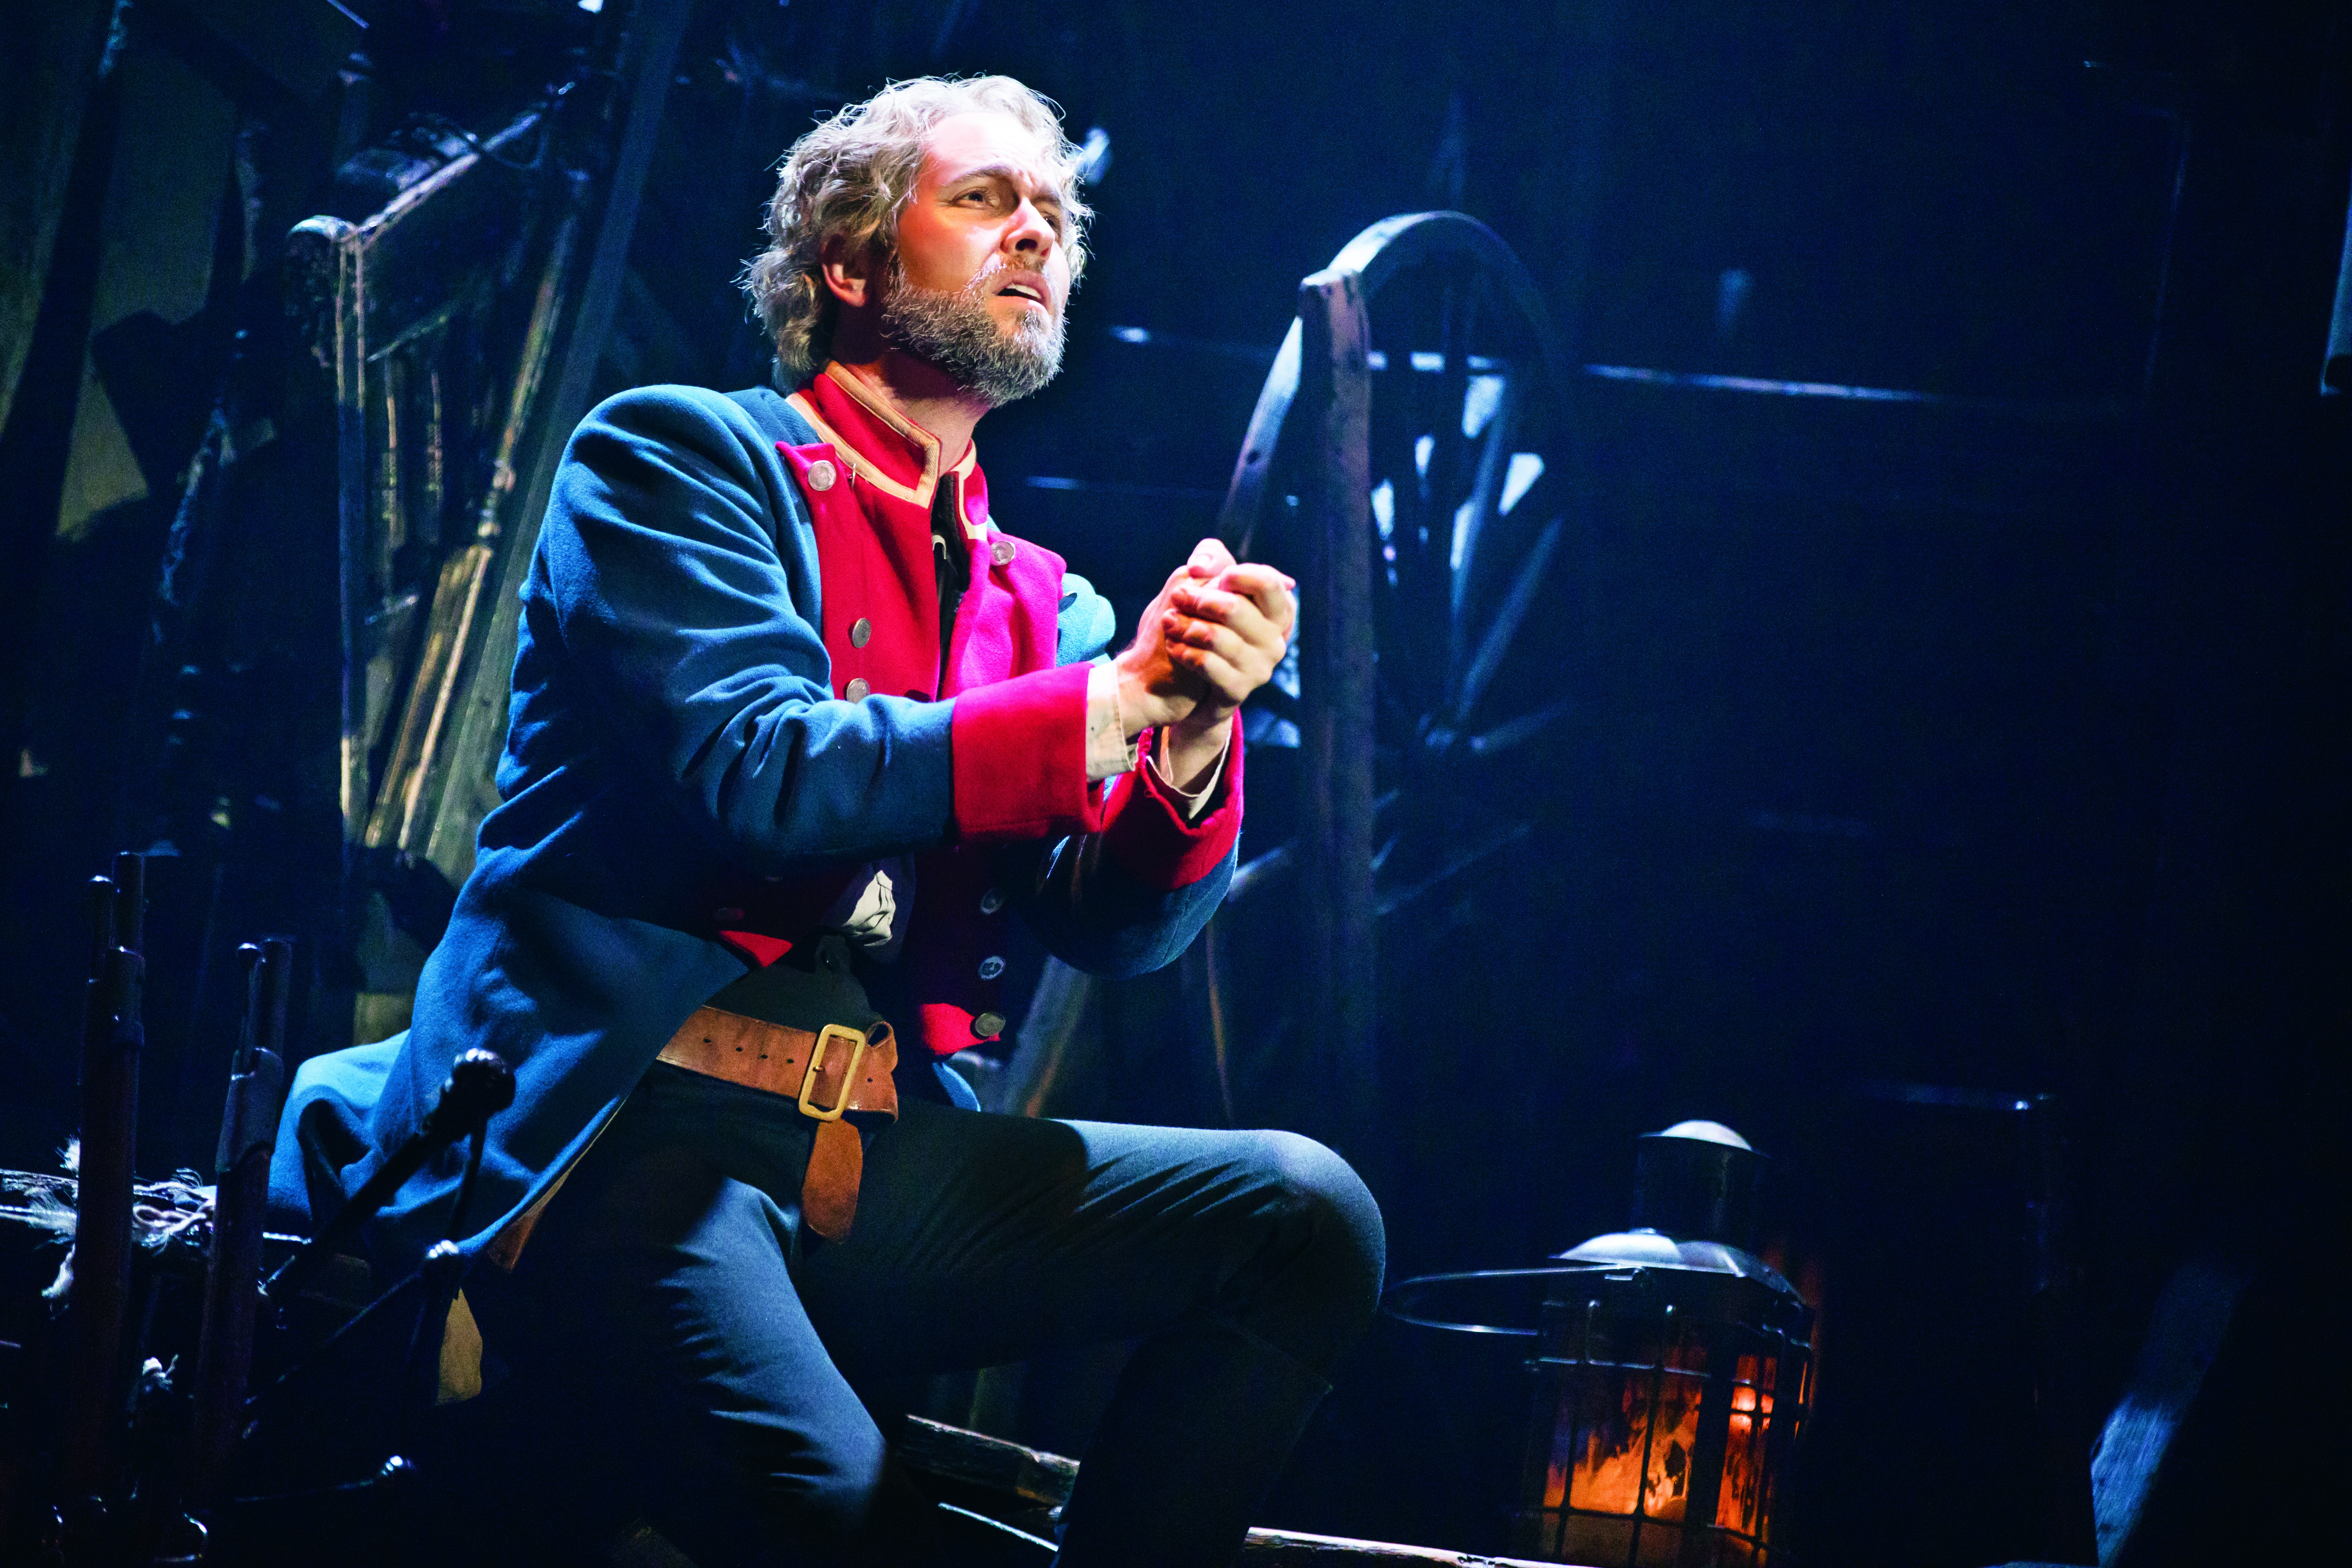 Finding Valjean: What it’s like to play the lead of Broadway’s ‘Les Misérables’